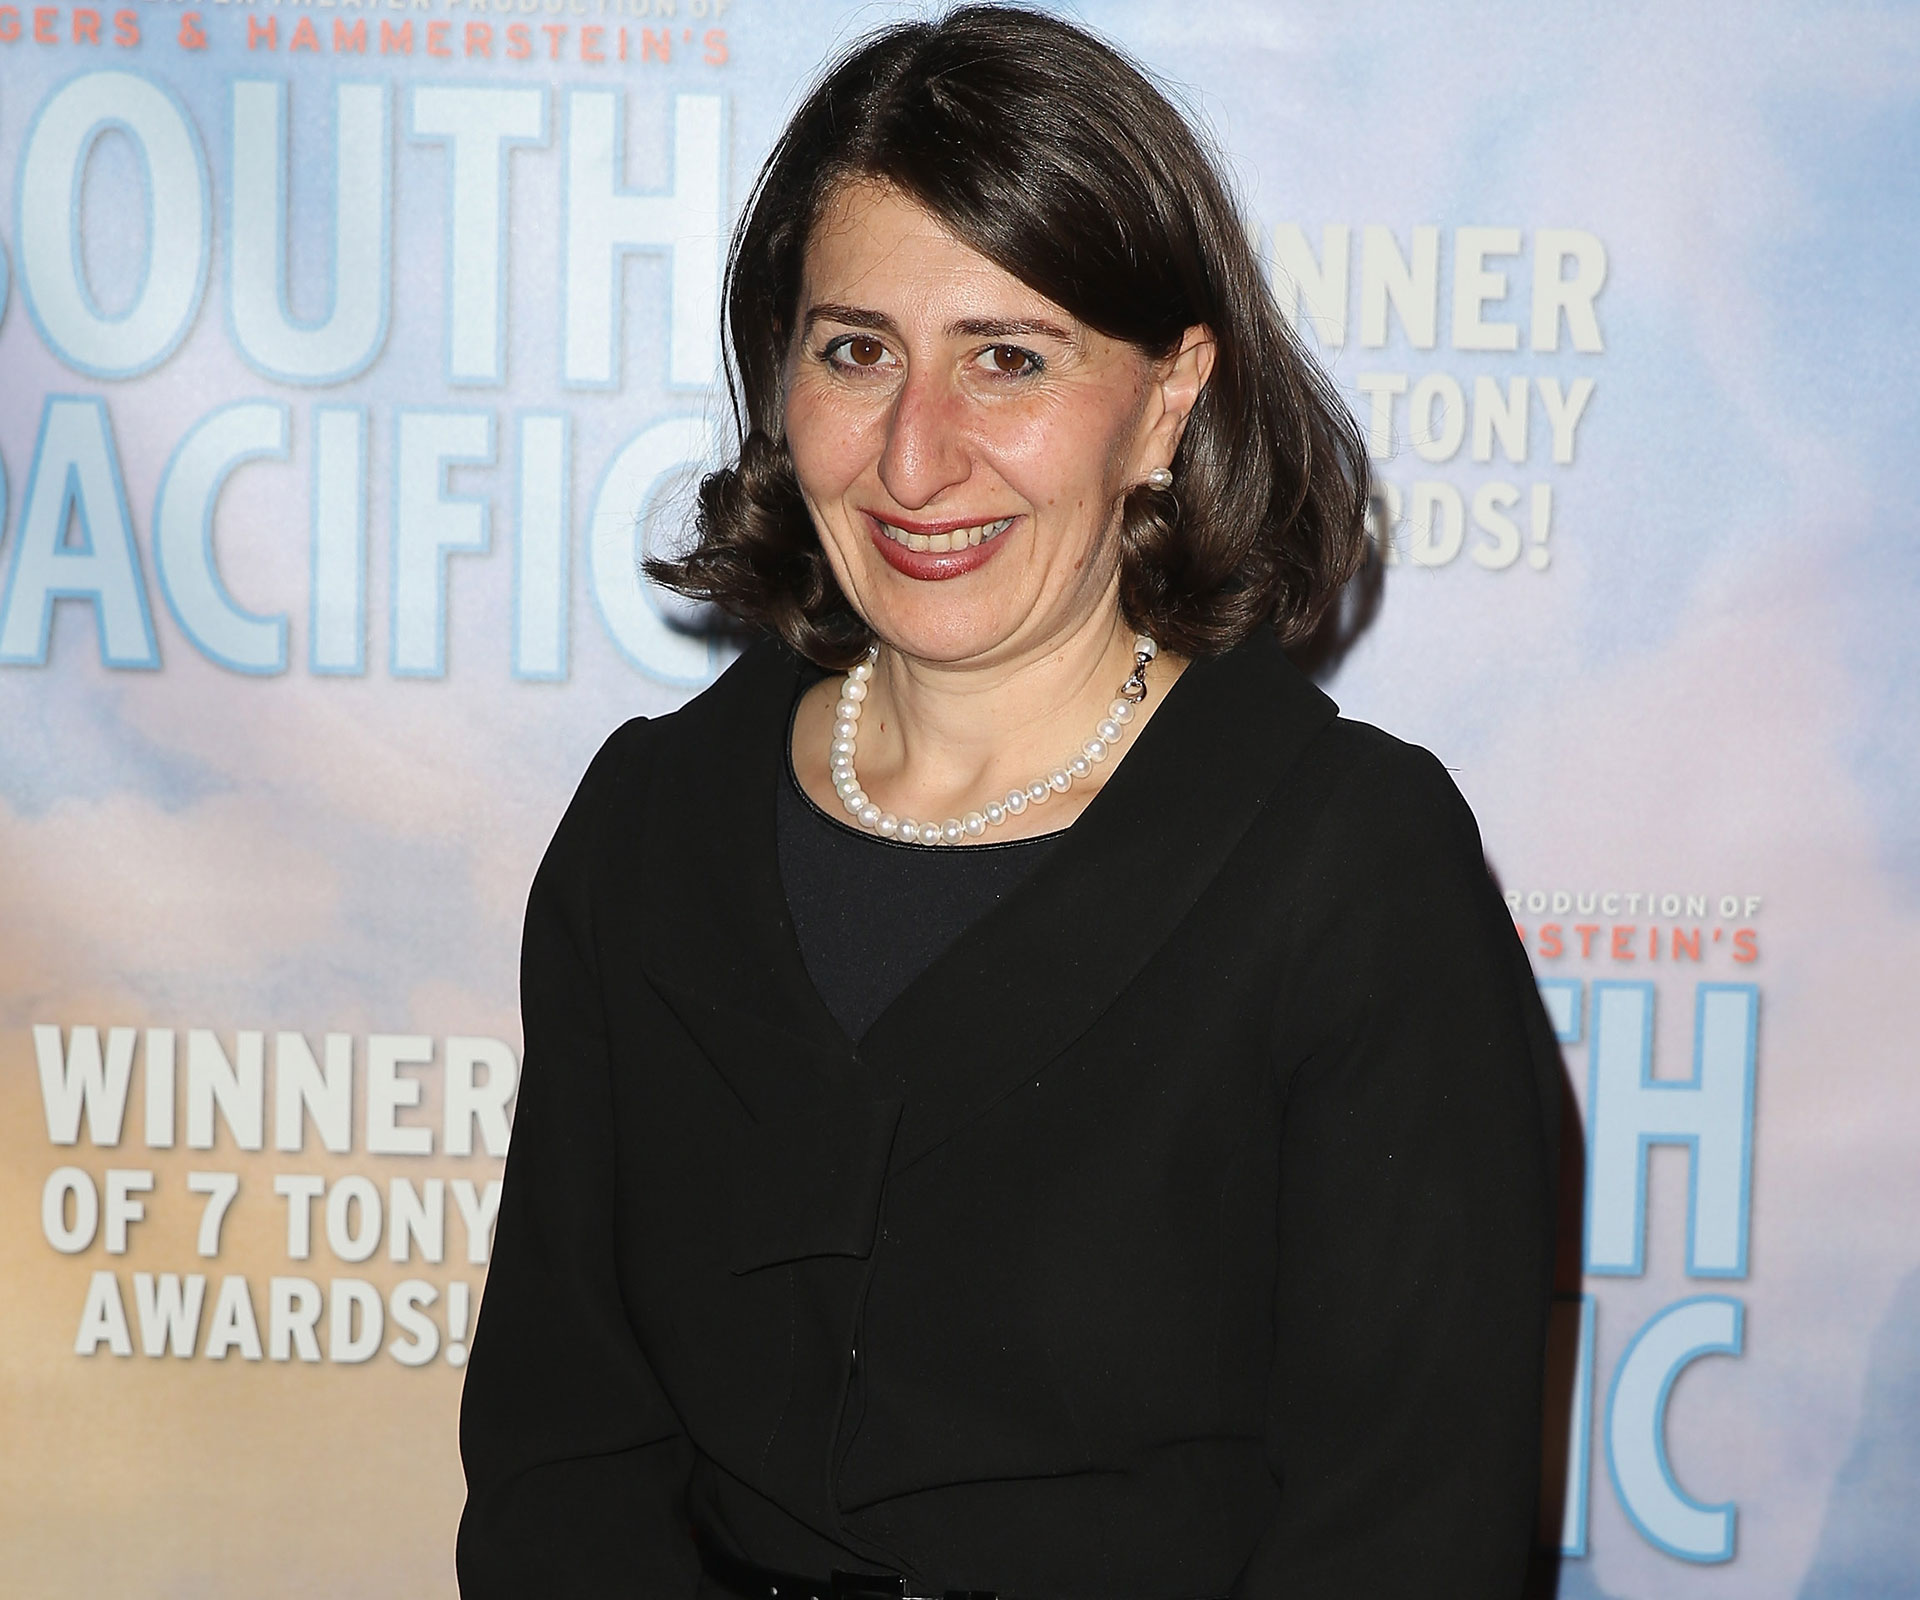 Gladys Berejiklian has been elected leader of the NSW Liberal party